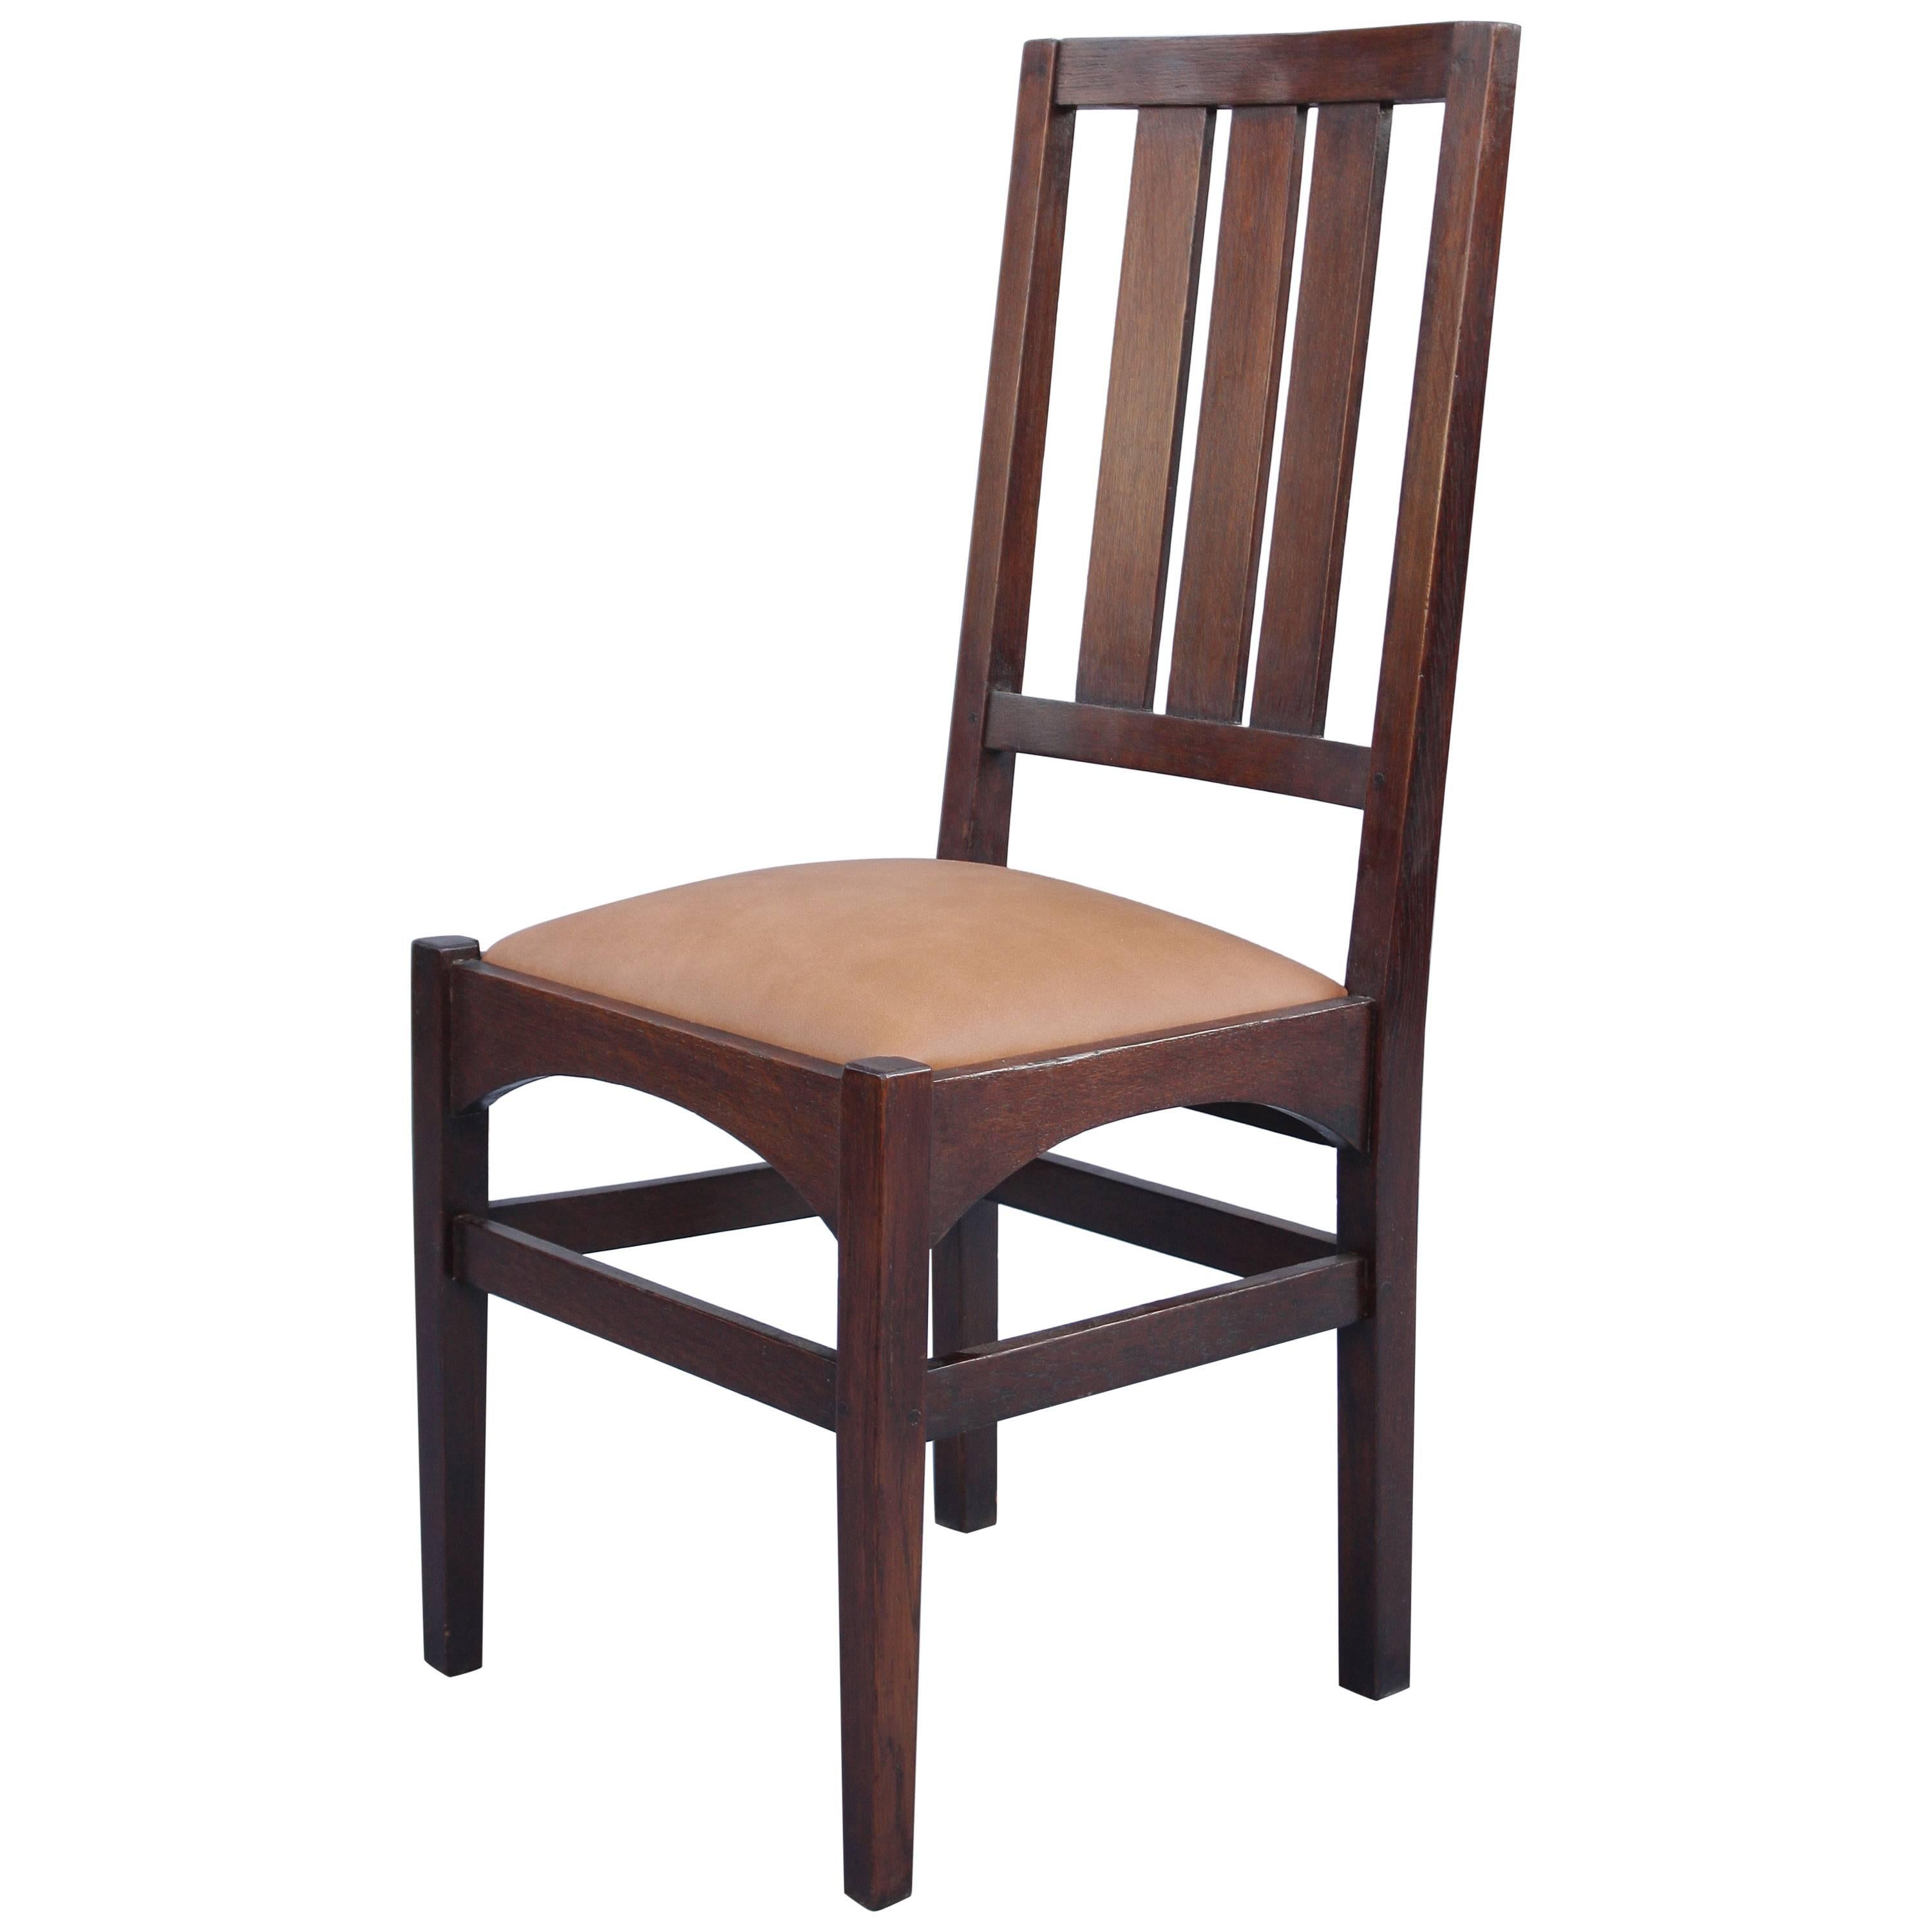 1910 Arts & Crafts Side Chair For Sale